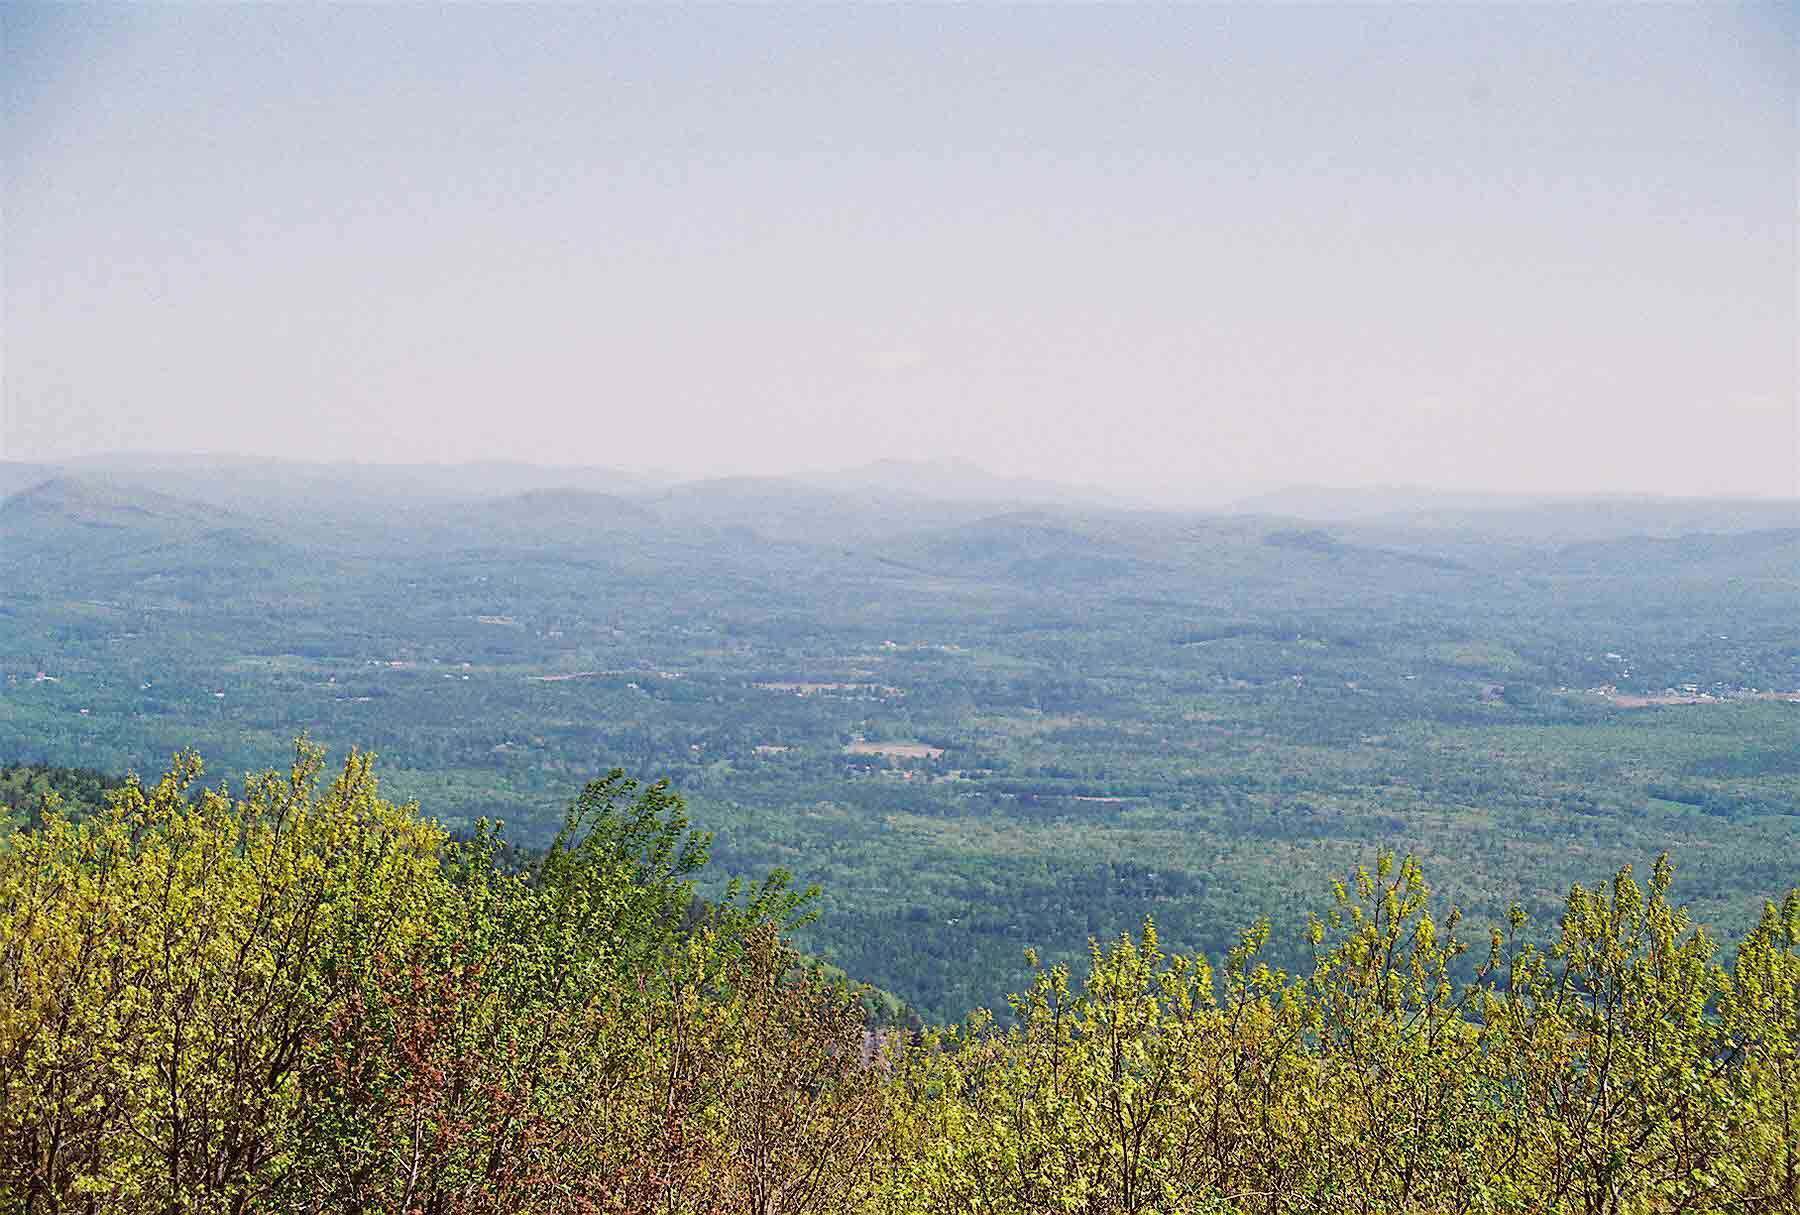 mm 4.6 - View to NE from summit of Mt. Everett. The mountain in the center of the picture  in the far distance is Mt. Greylock, highest point in MA. 74 trail miles and about 50 airline miles away.  Courtesy dlcul@conncoll.edu